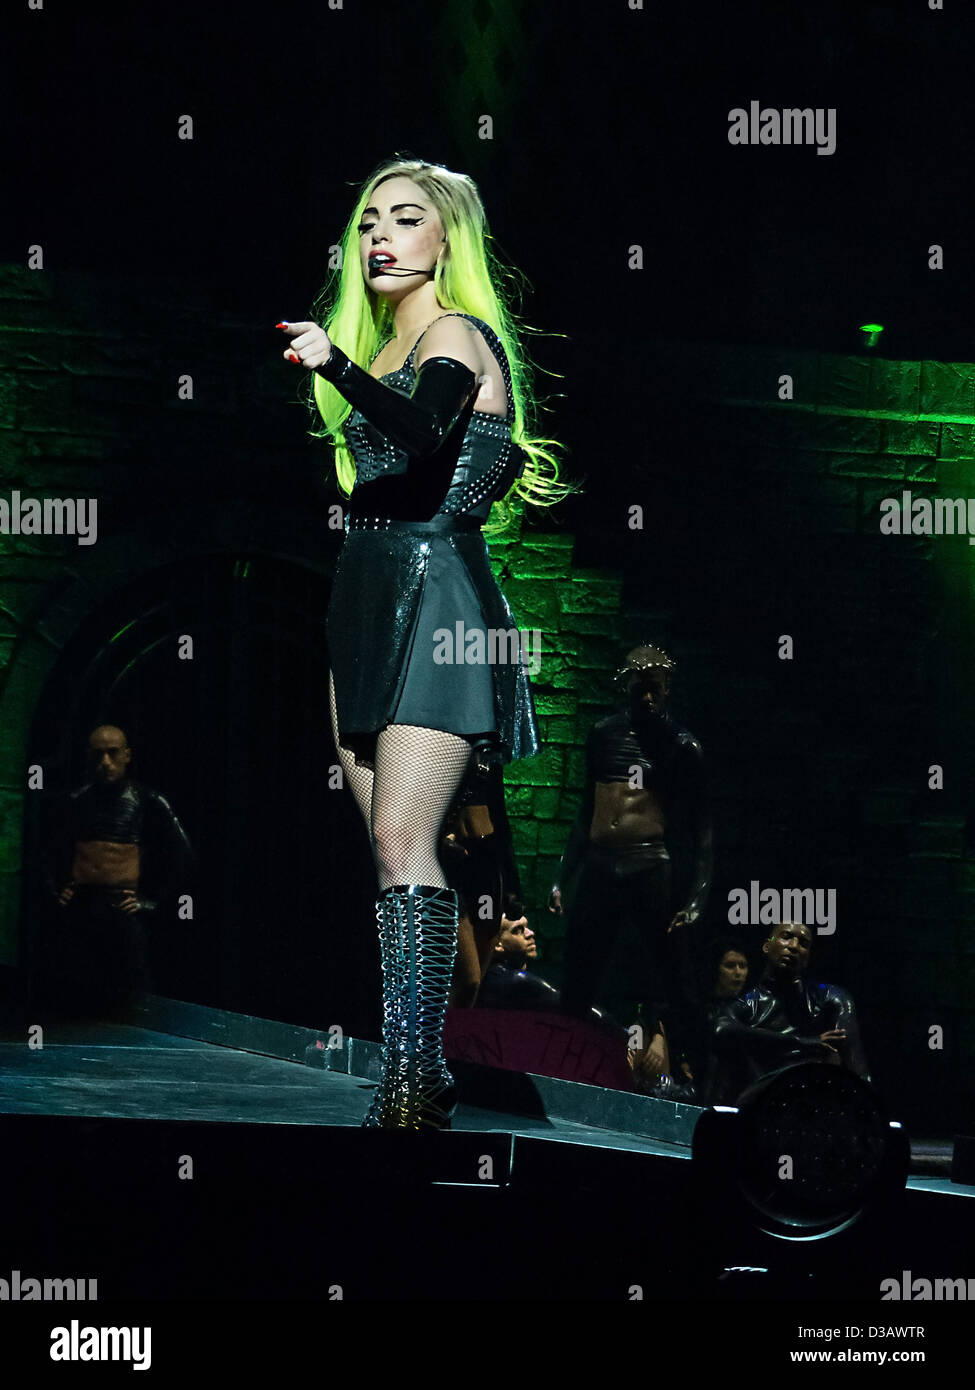 American Singer Lady Gaga Performs During Her Born This Way Ball Tour Stock Photo Alamy